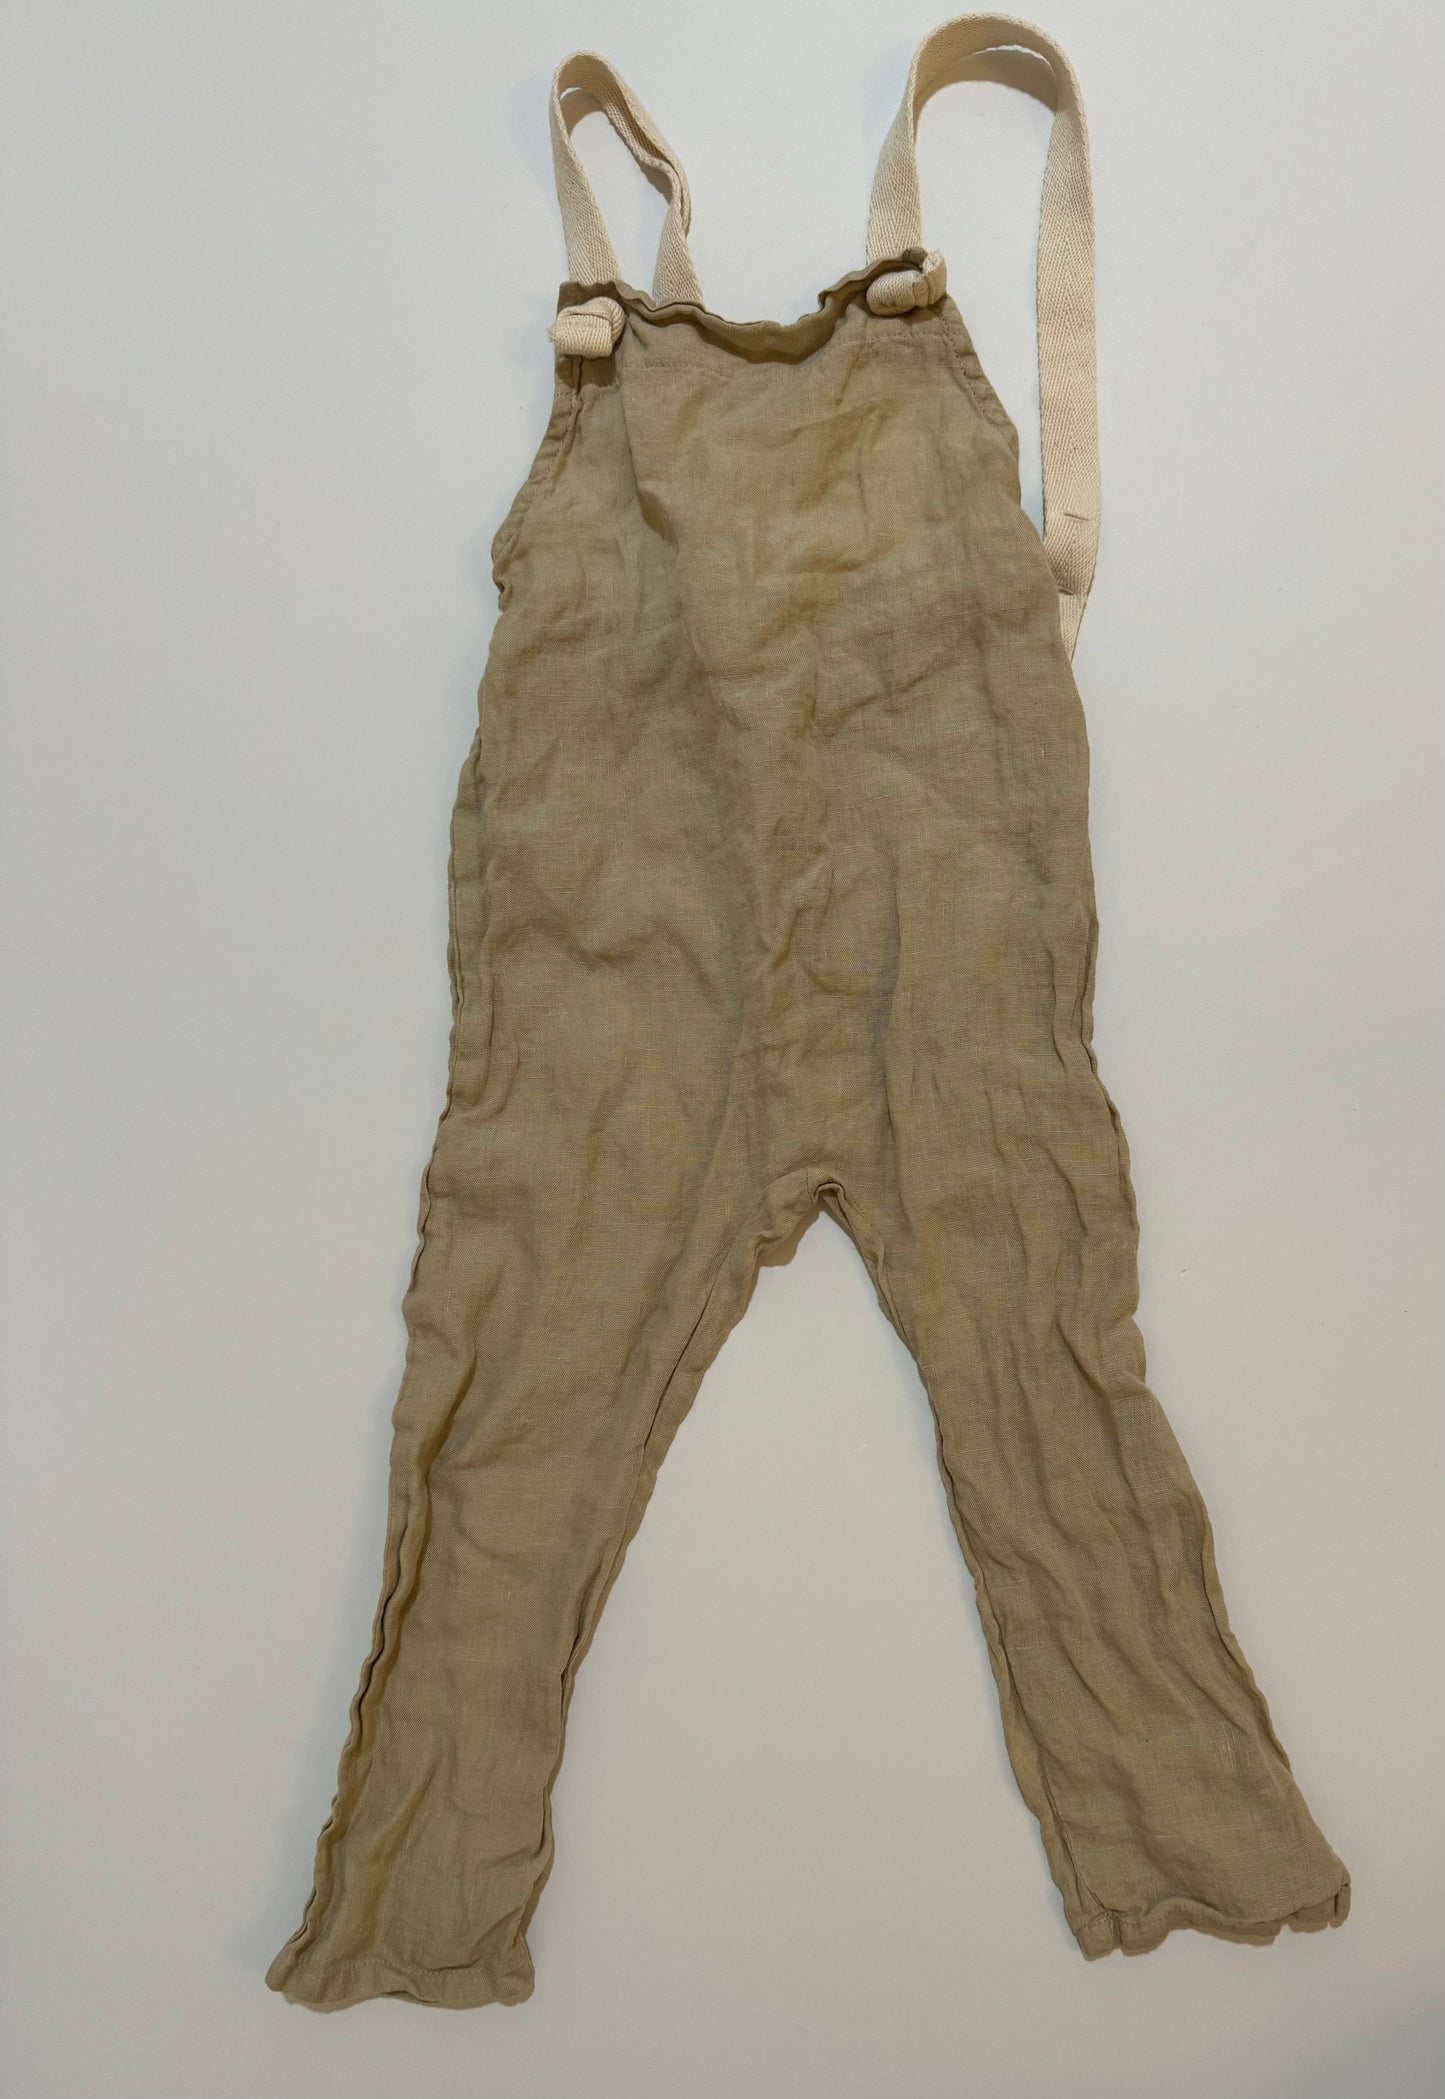 *REDUCED* 2-3 Gender Neutral The Simple Folk Linen Oatmeal Overalls